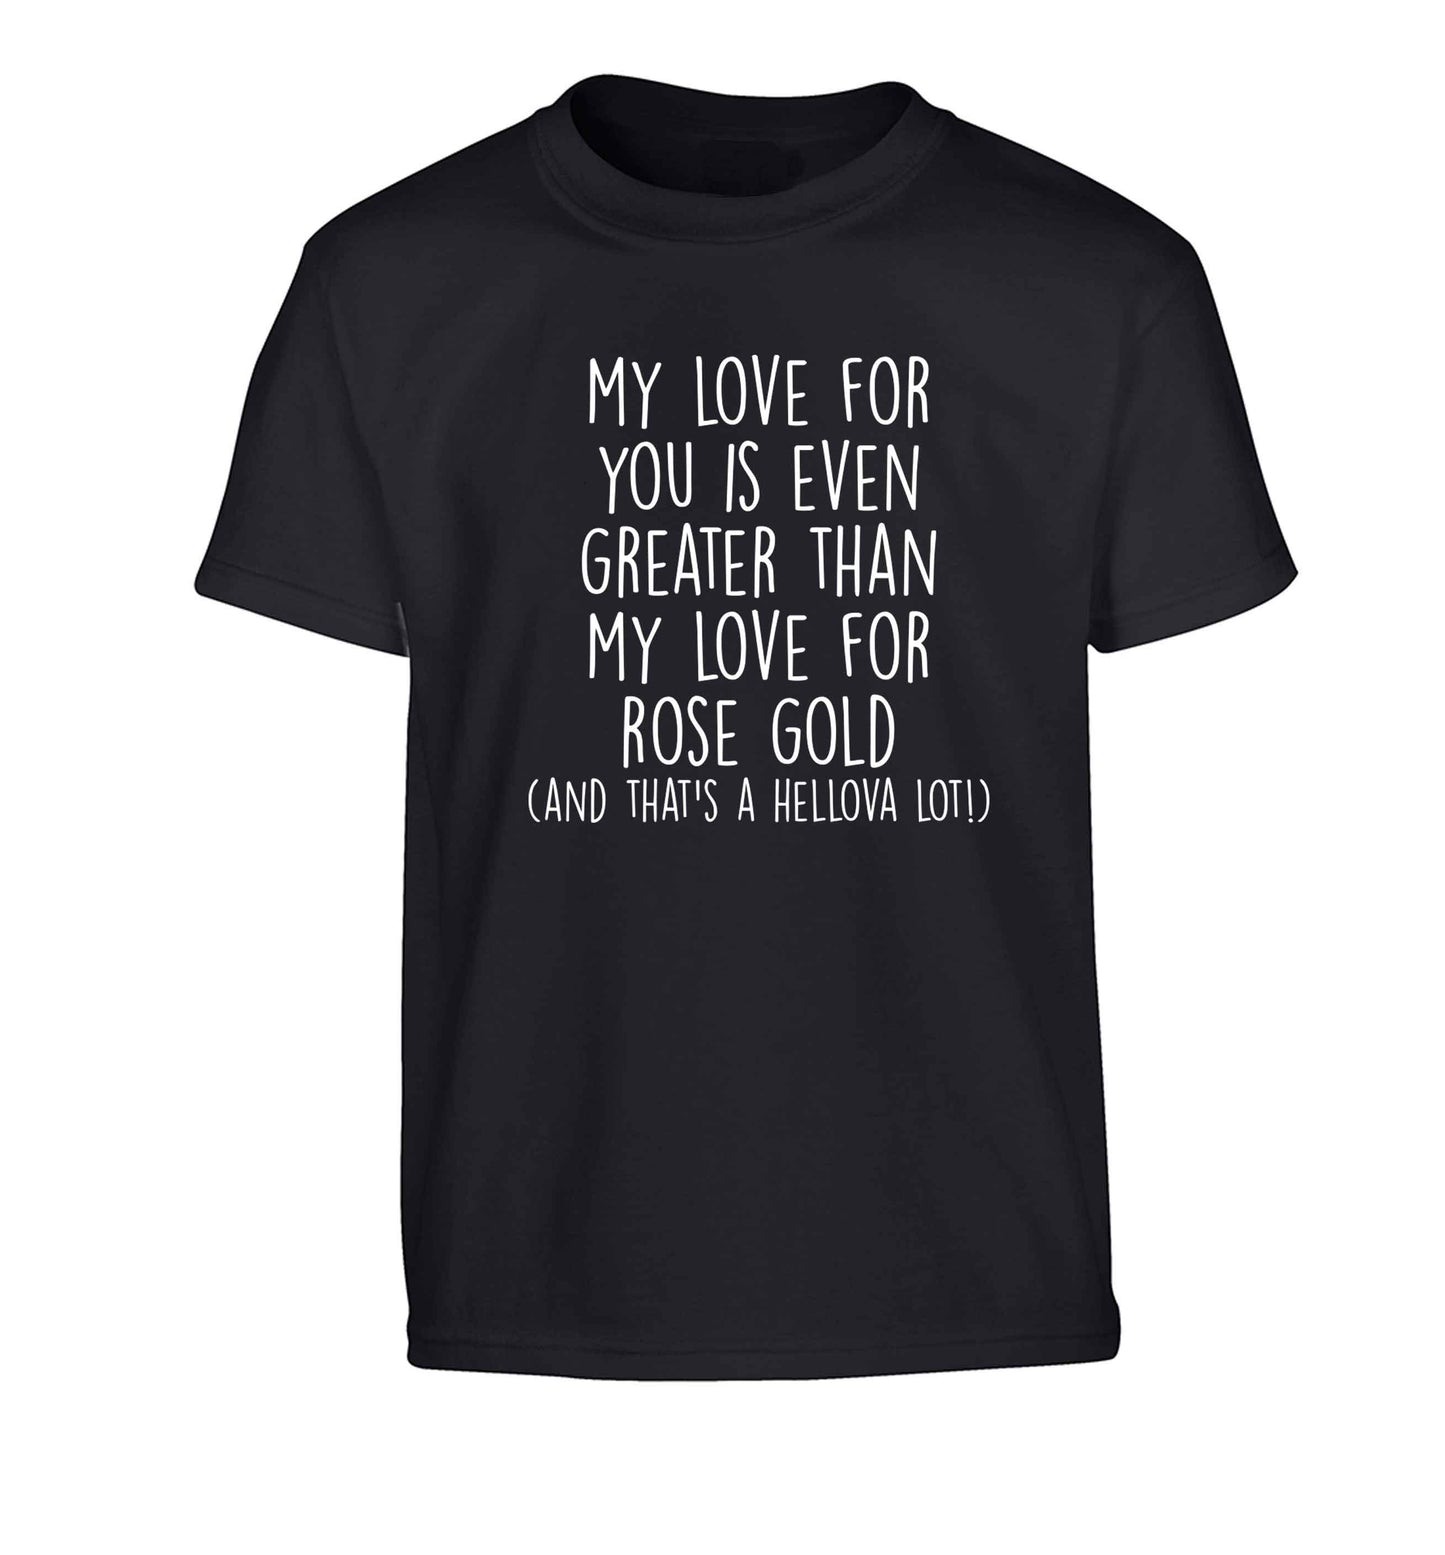 My love for you is even greater than my love for rose gold (and that's a hellova lot) Children's black Tshirt 12-13 Years